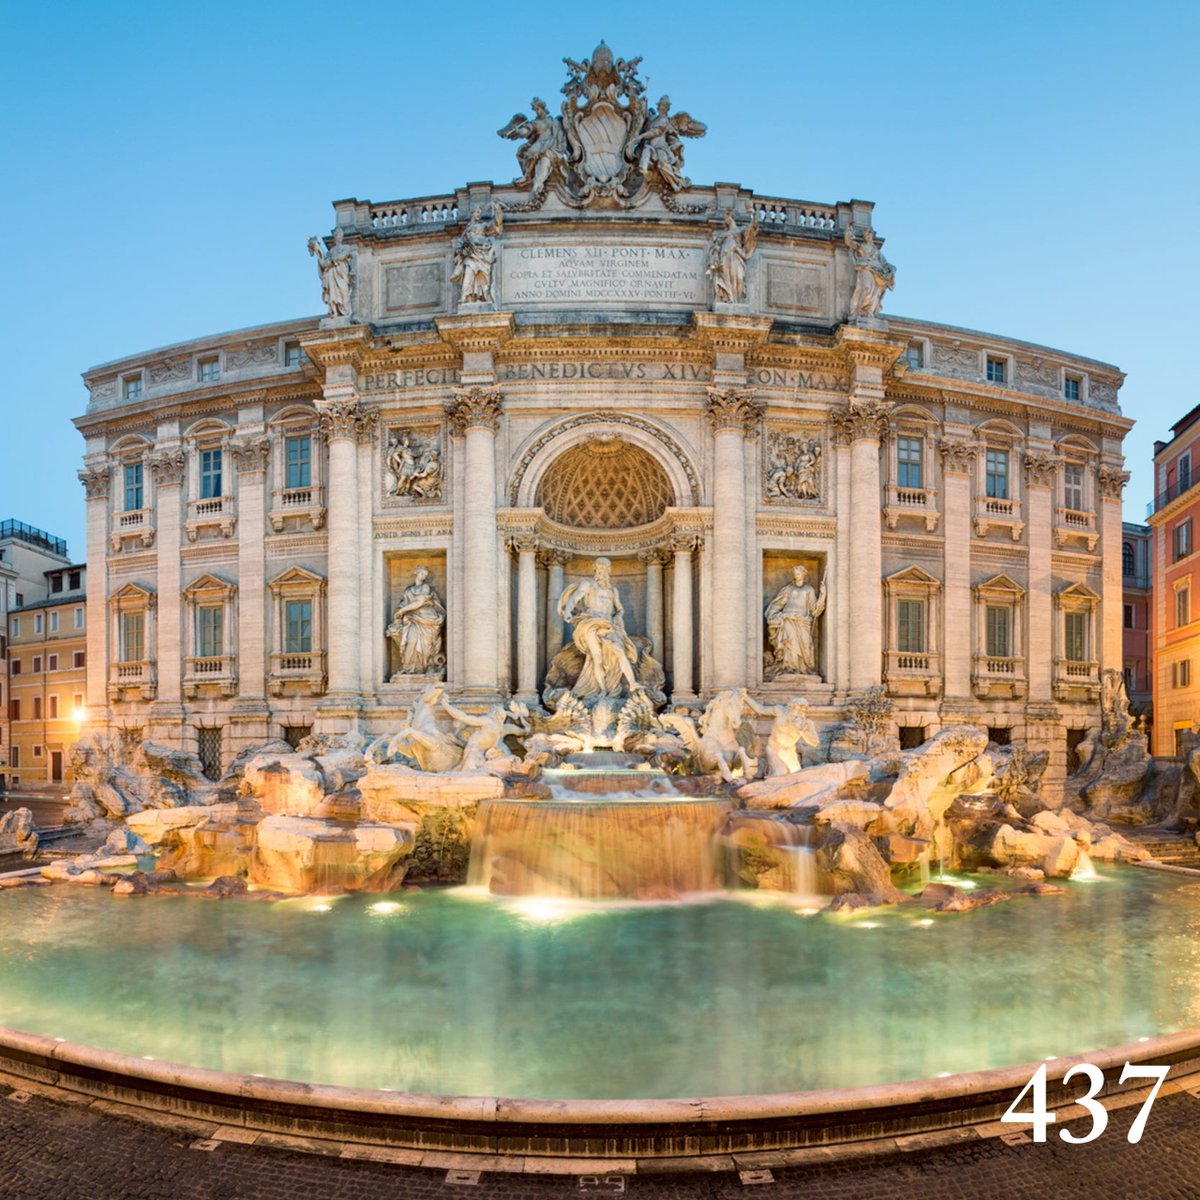 On May 22, 1762, the Trevi Fountain was officially completed and inaugurated in Rome. Today also marks 437 days since Cllr Sarah Warren said she wanted a healthy debate on LTNs and how we get around in Bath. We hope she won't leave us waiting 262 years.